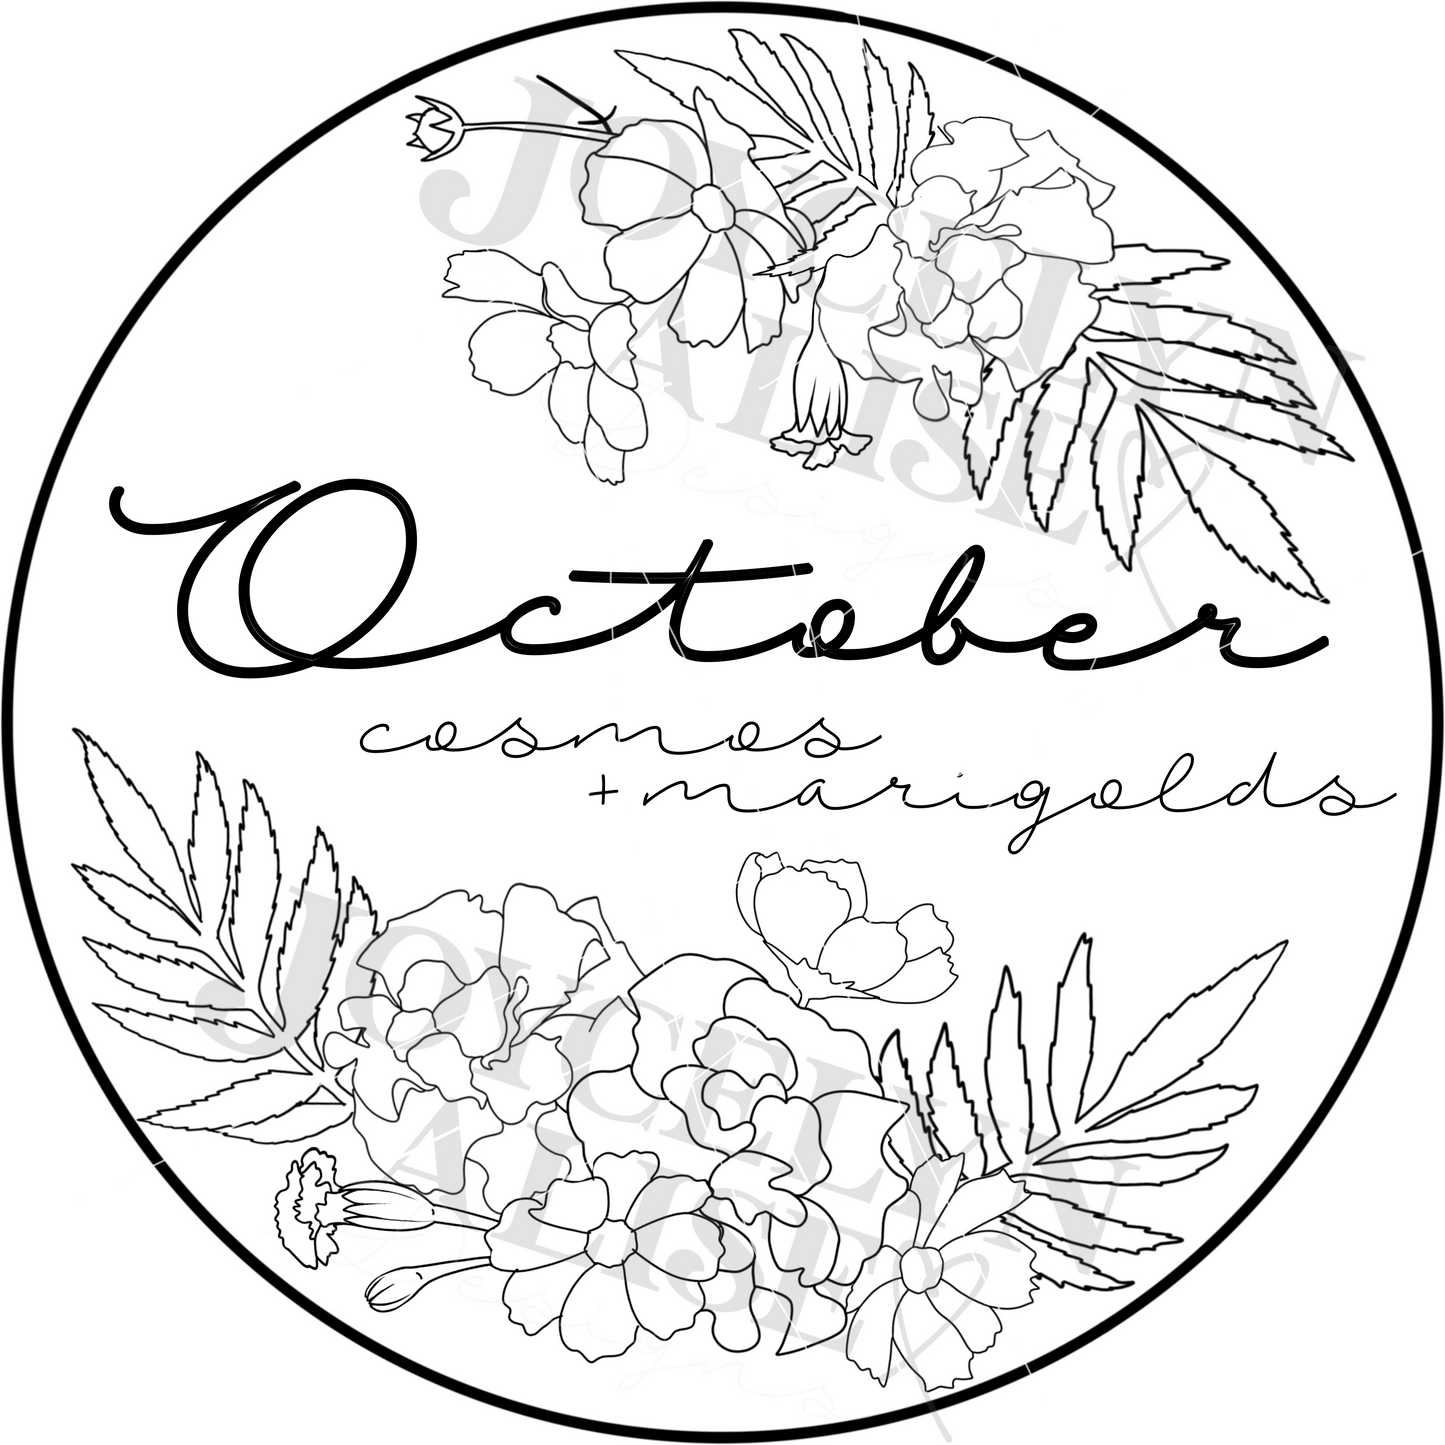 October marigolds + cosmos scroll saw template